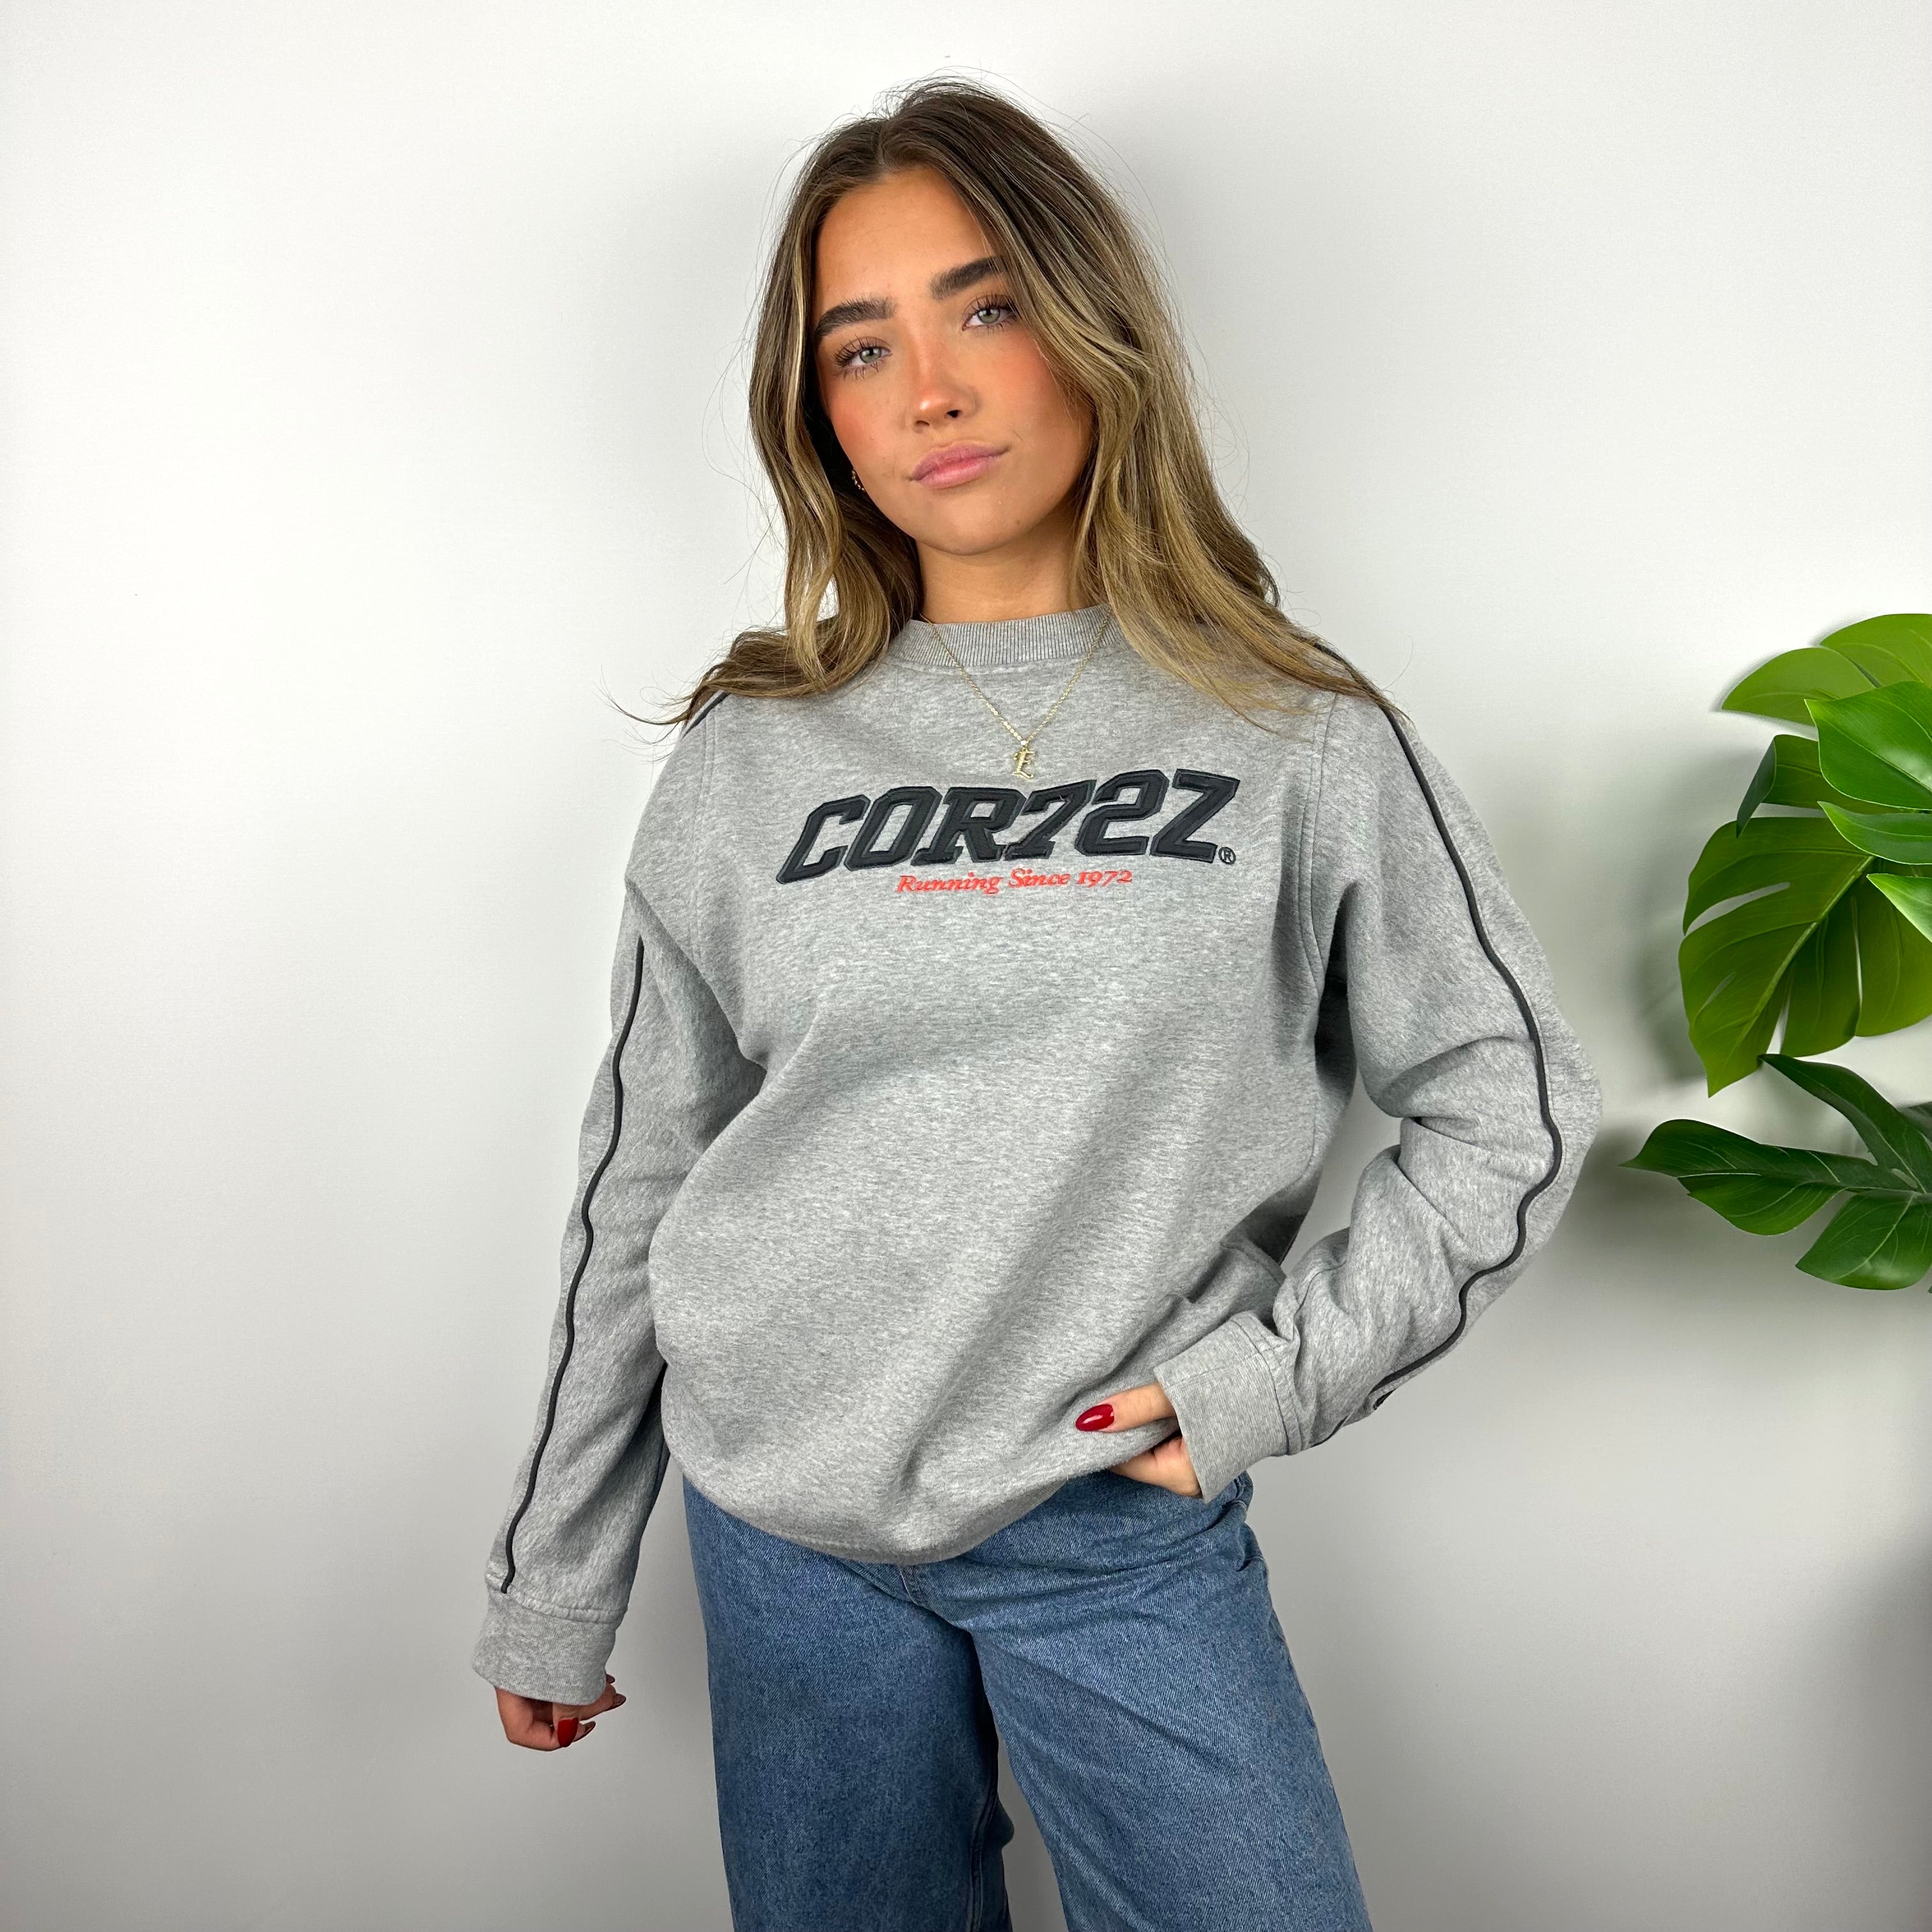 Nike Cortez Grey Embroidered Spell Out Sweatshirt (S)